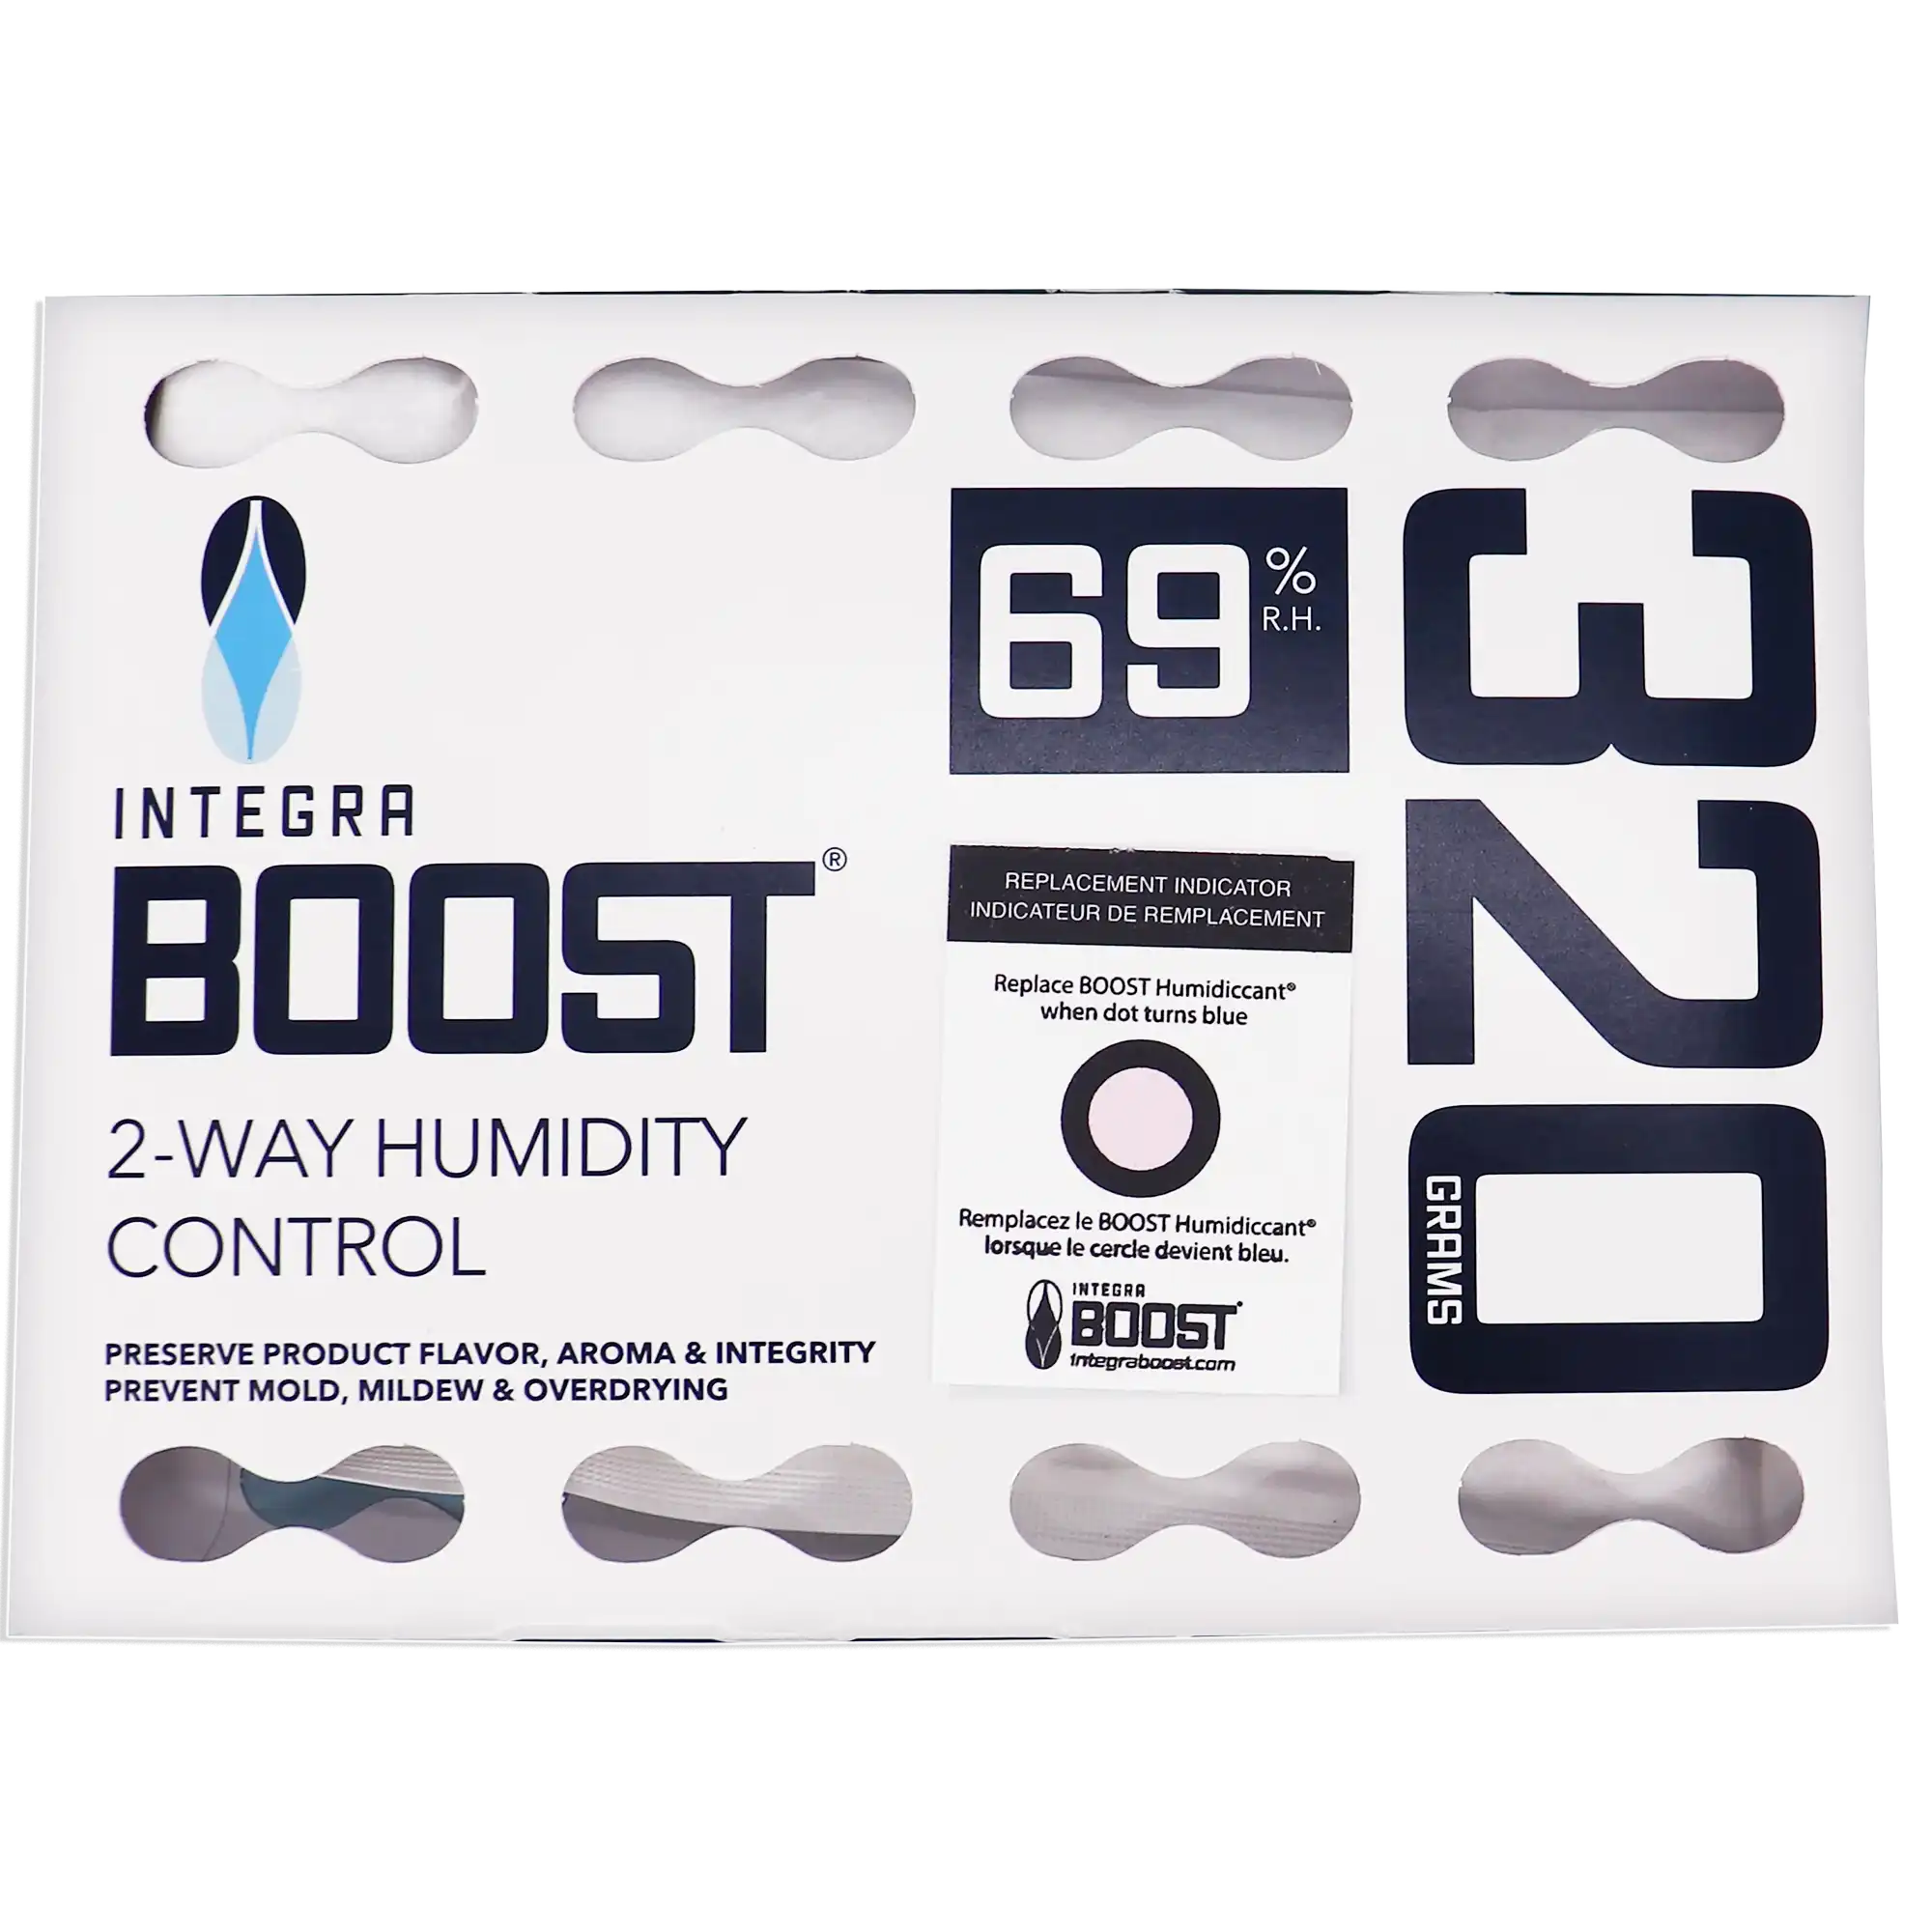 Integra Boost 320g Befeuchterpack 69% R.H.
